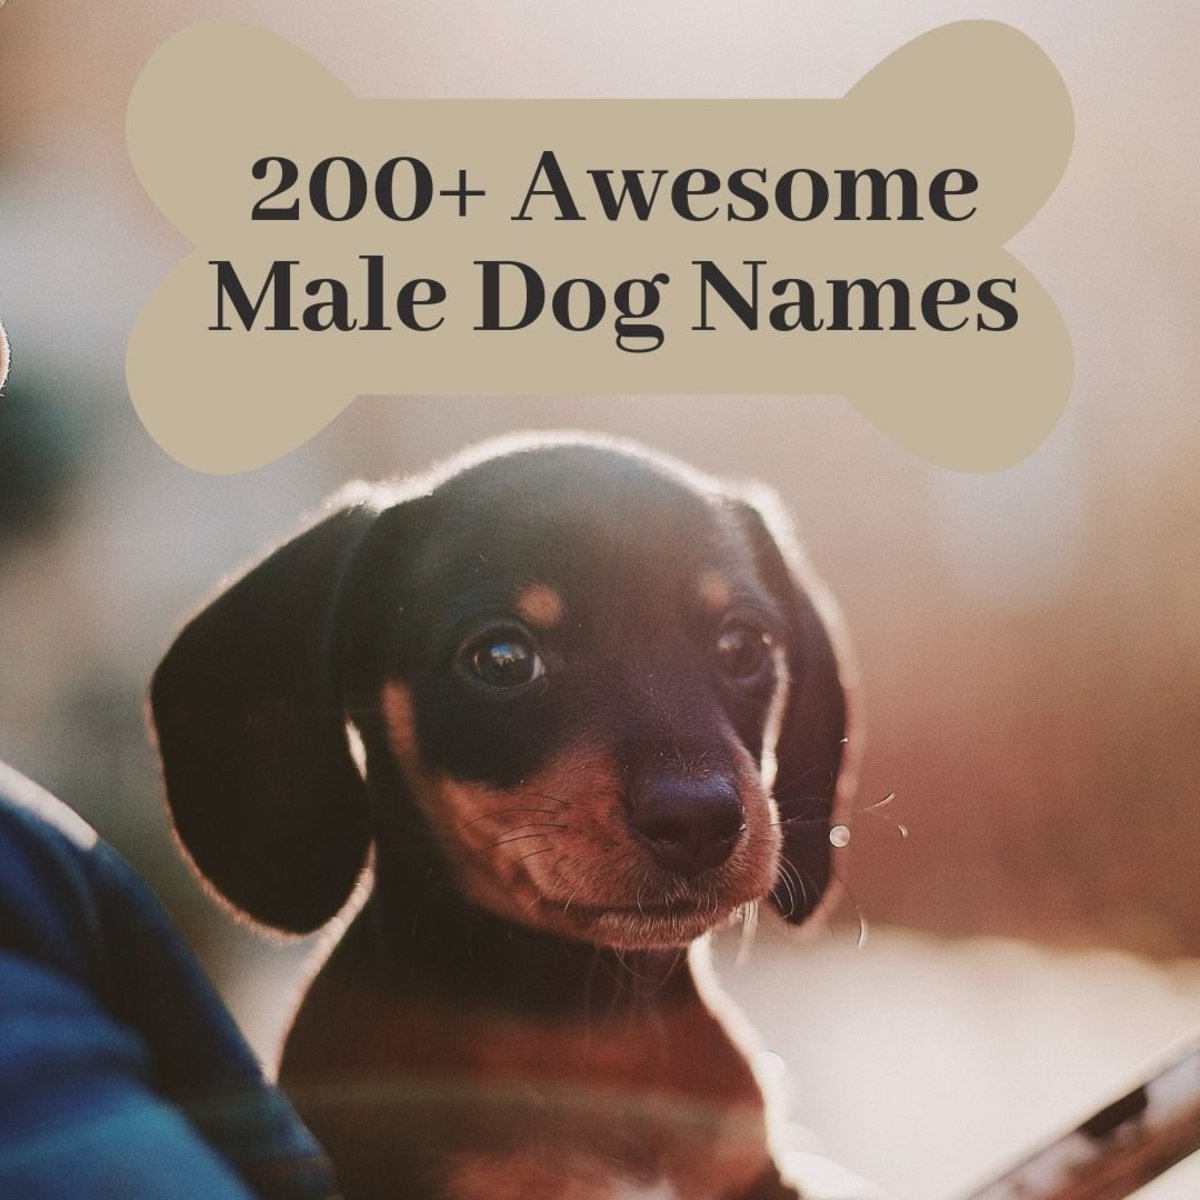 Have a new pup in your life? Have a hard time naming him? Find your next male puppy name here!